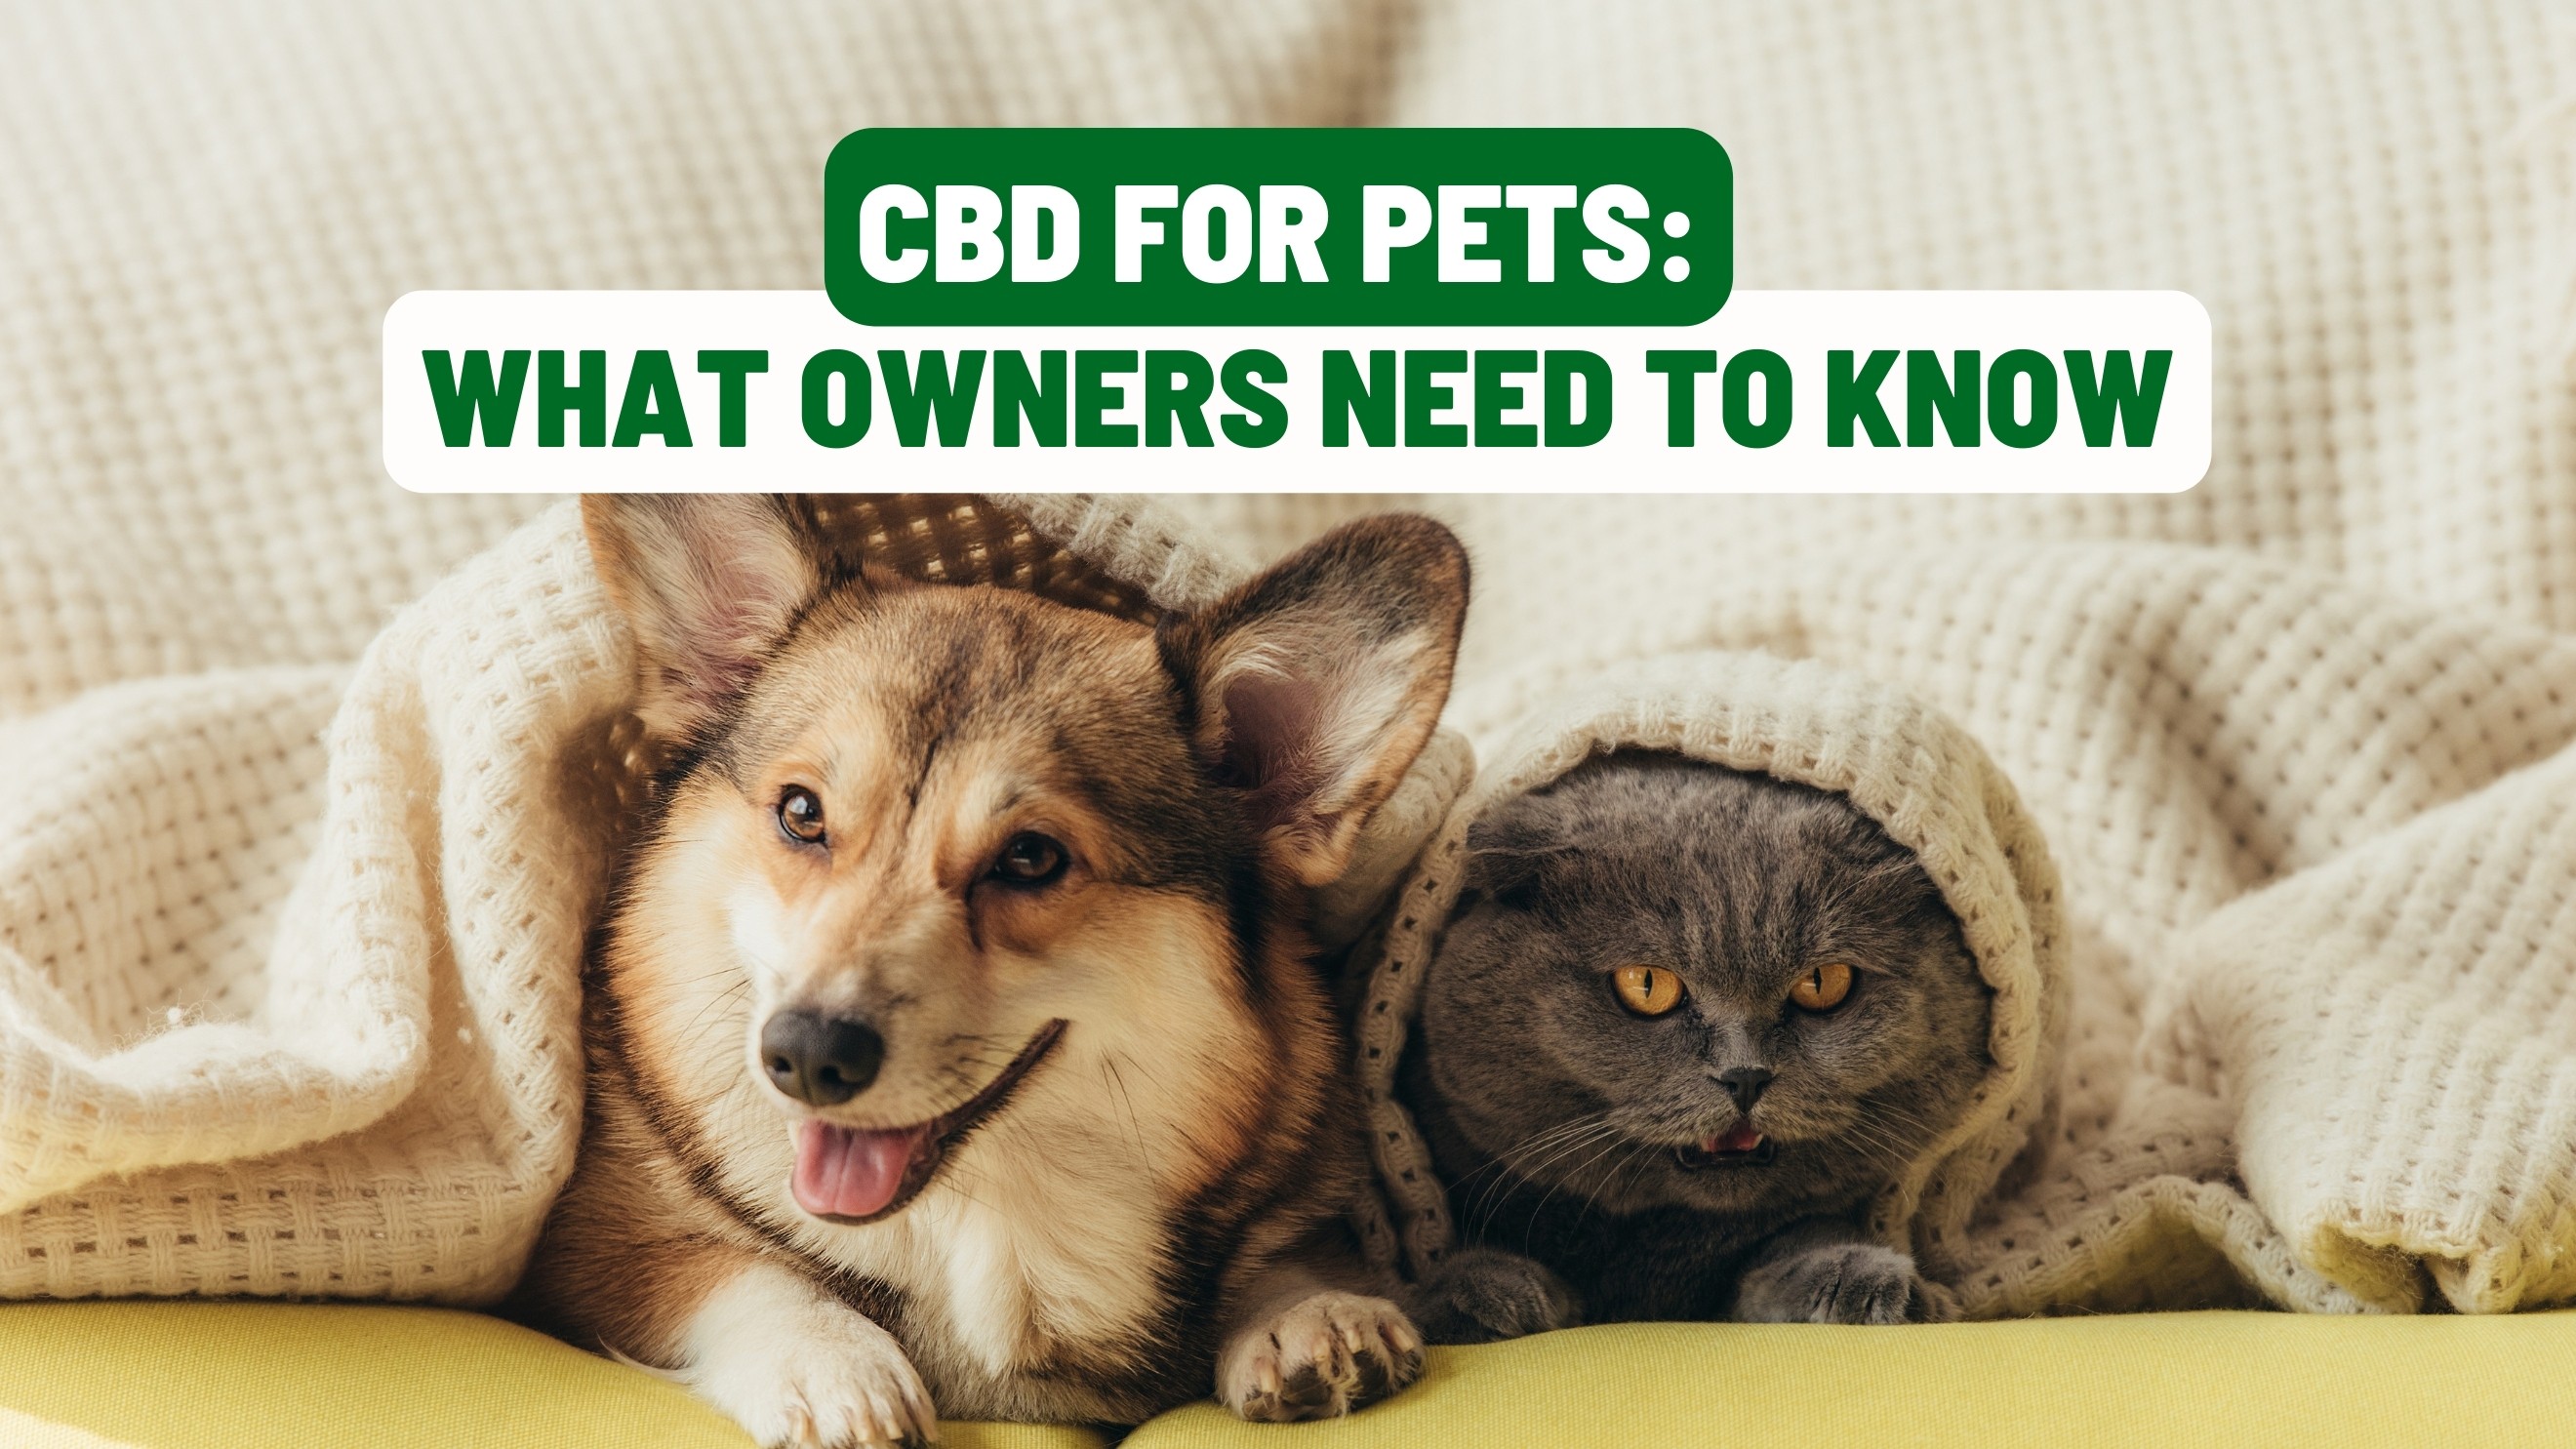 CBD for Pets: What Owners Need to Know